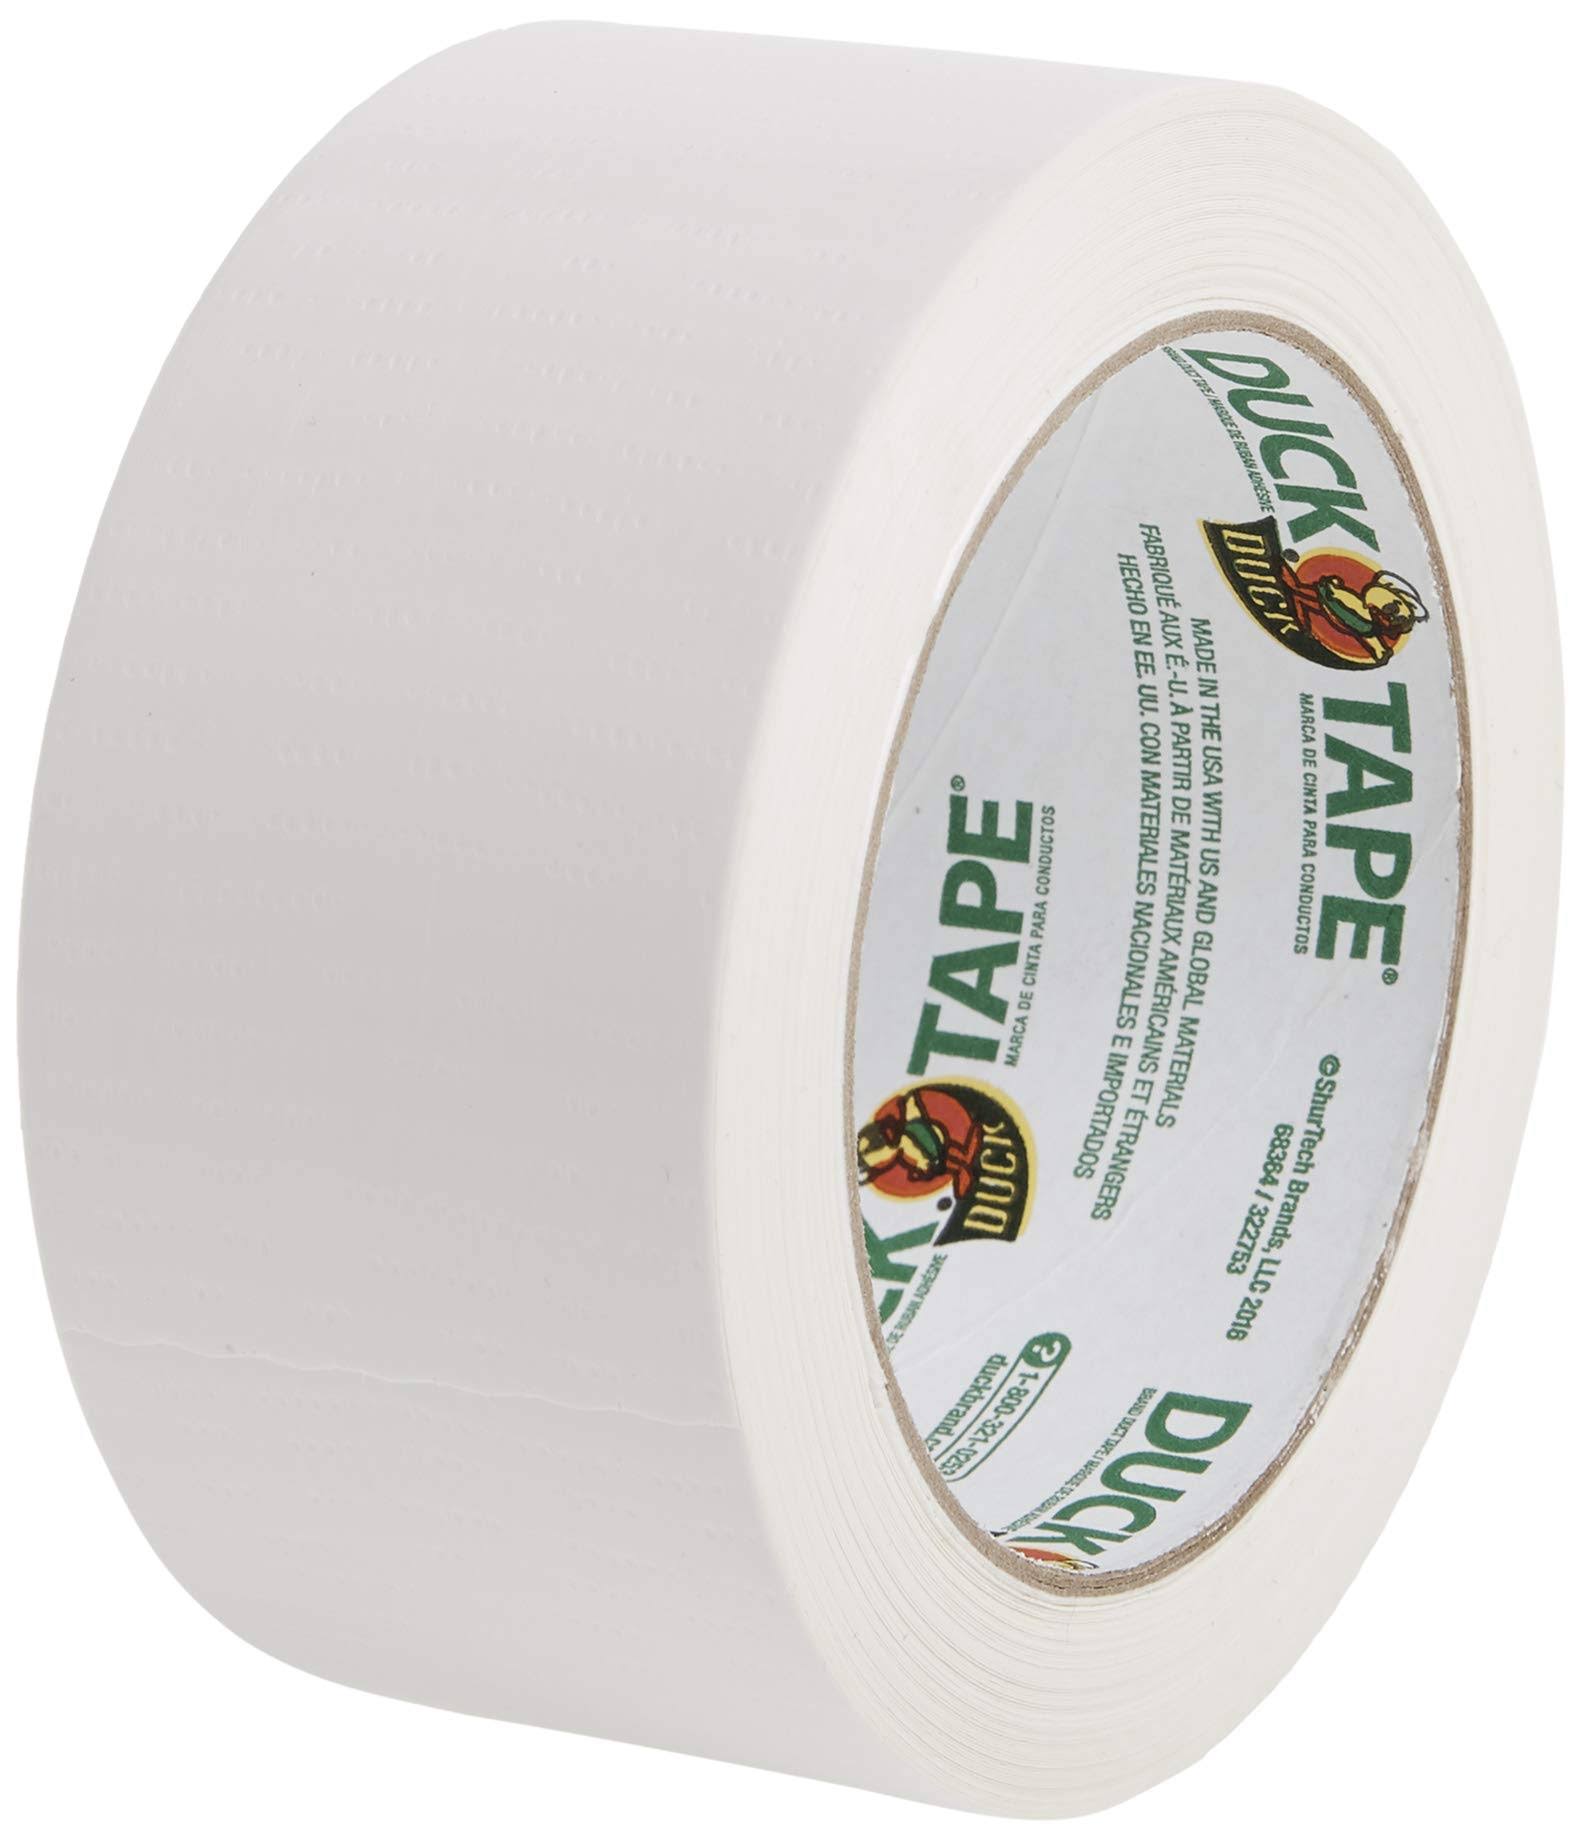 Colored Duct Tape - 1.88" x 20yds, 3" Core, White